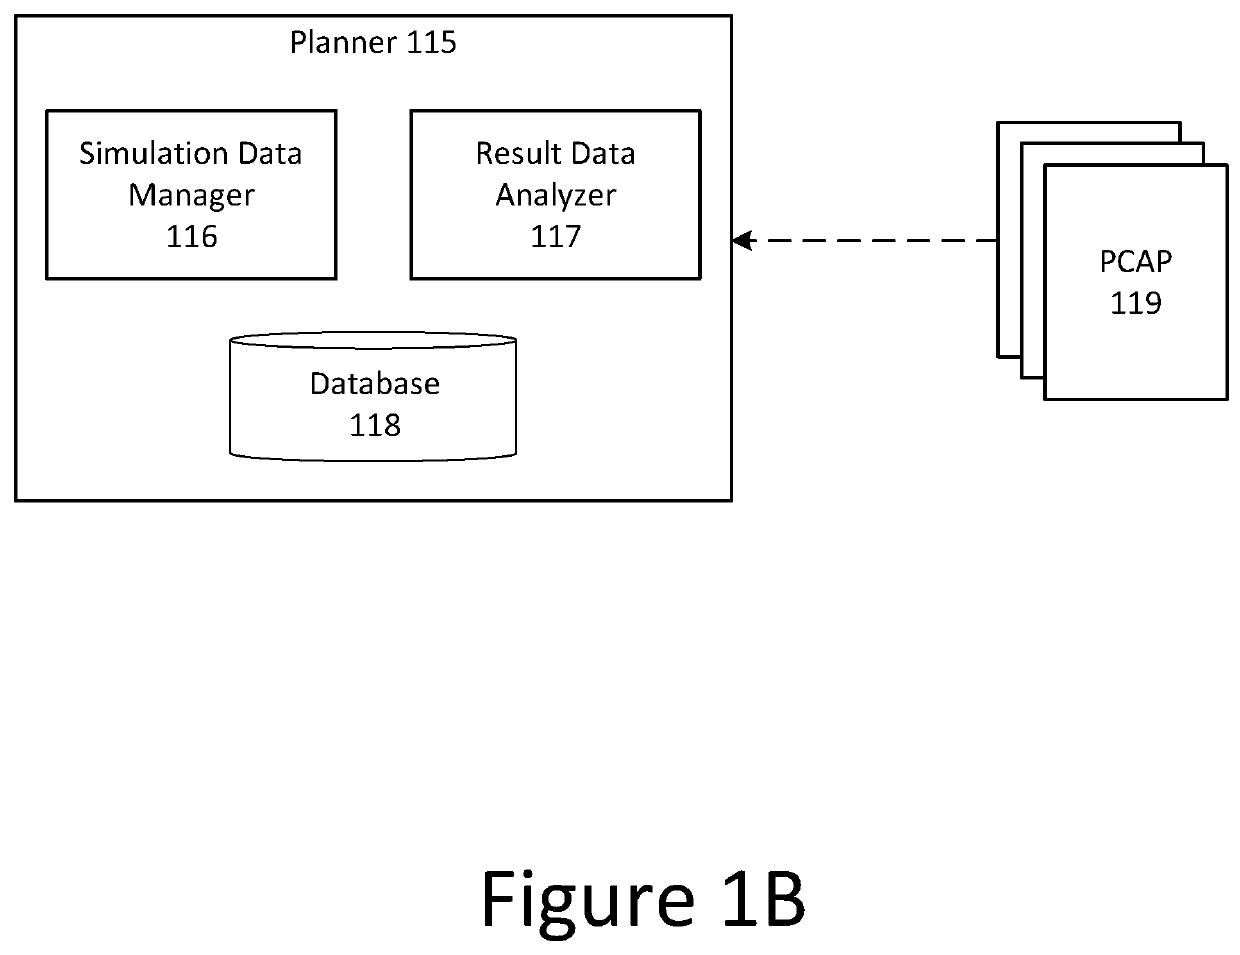 Systems and methods for testing known bad destinations in a production network